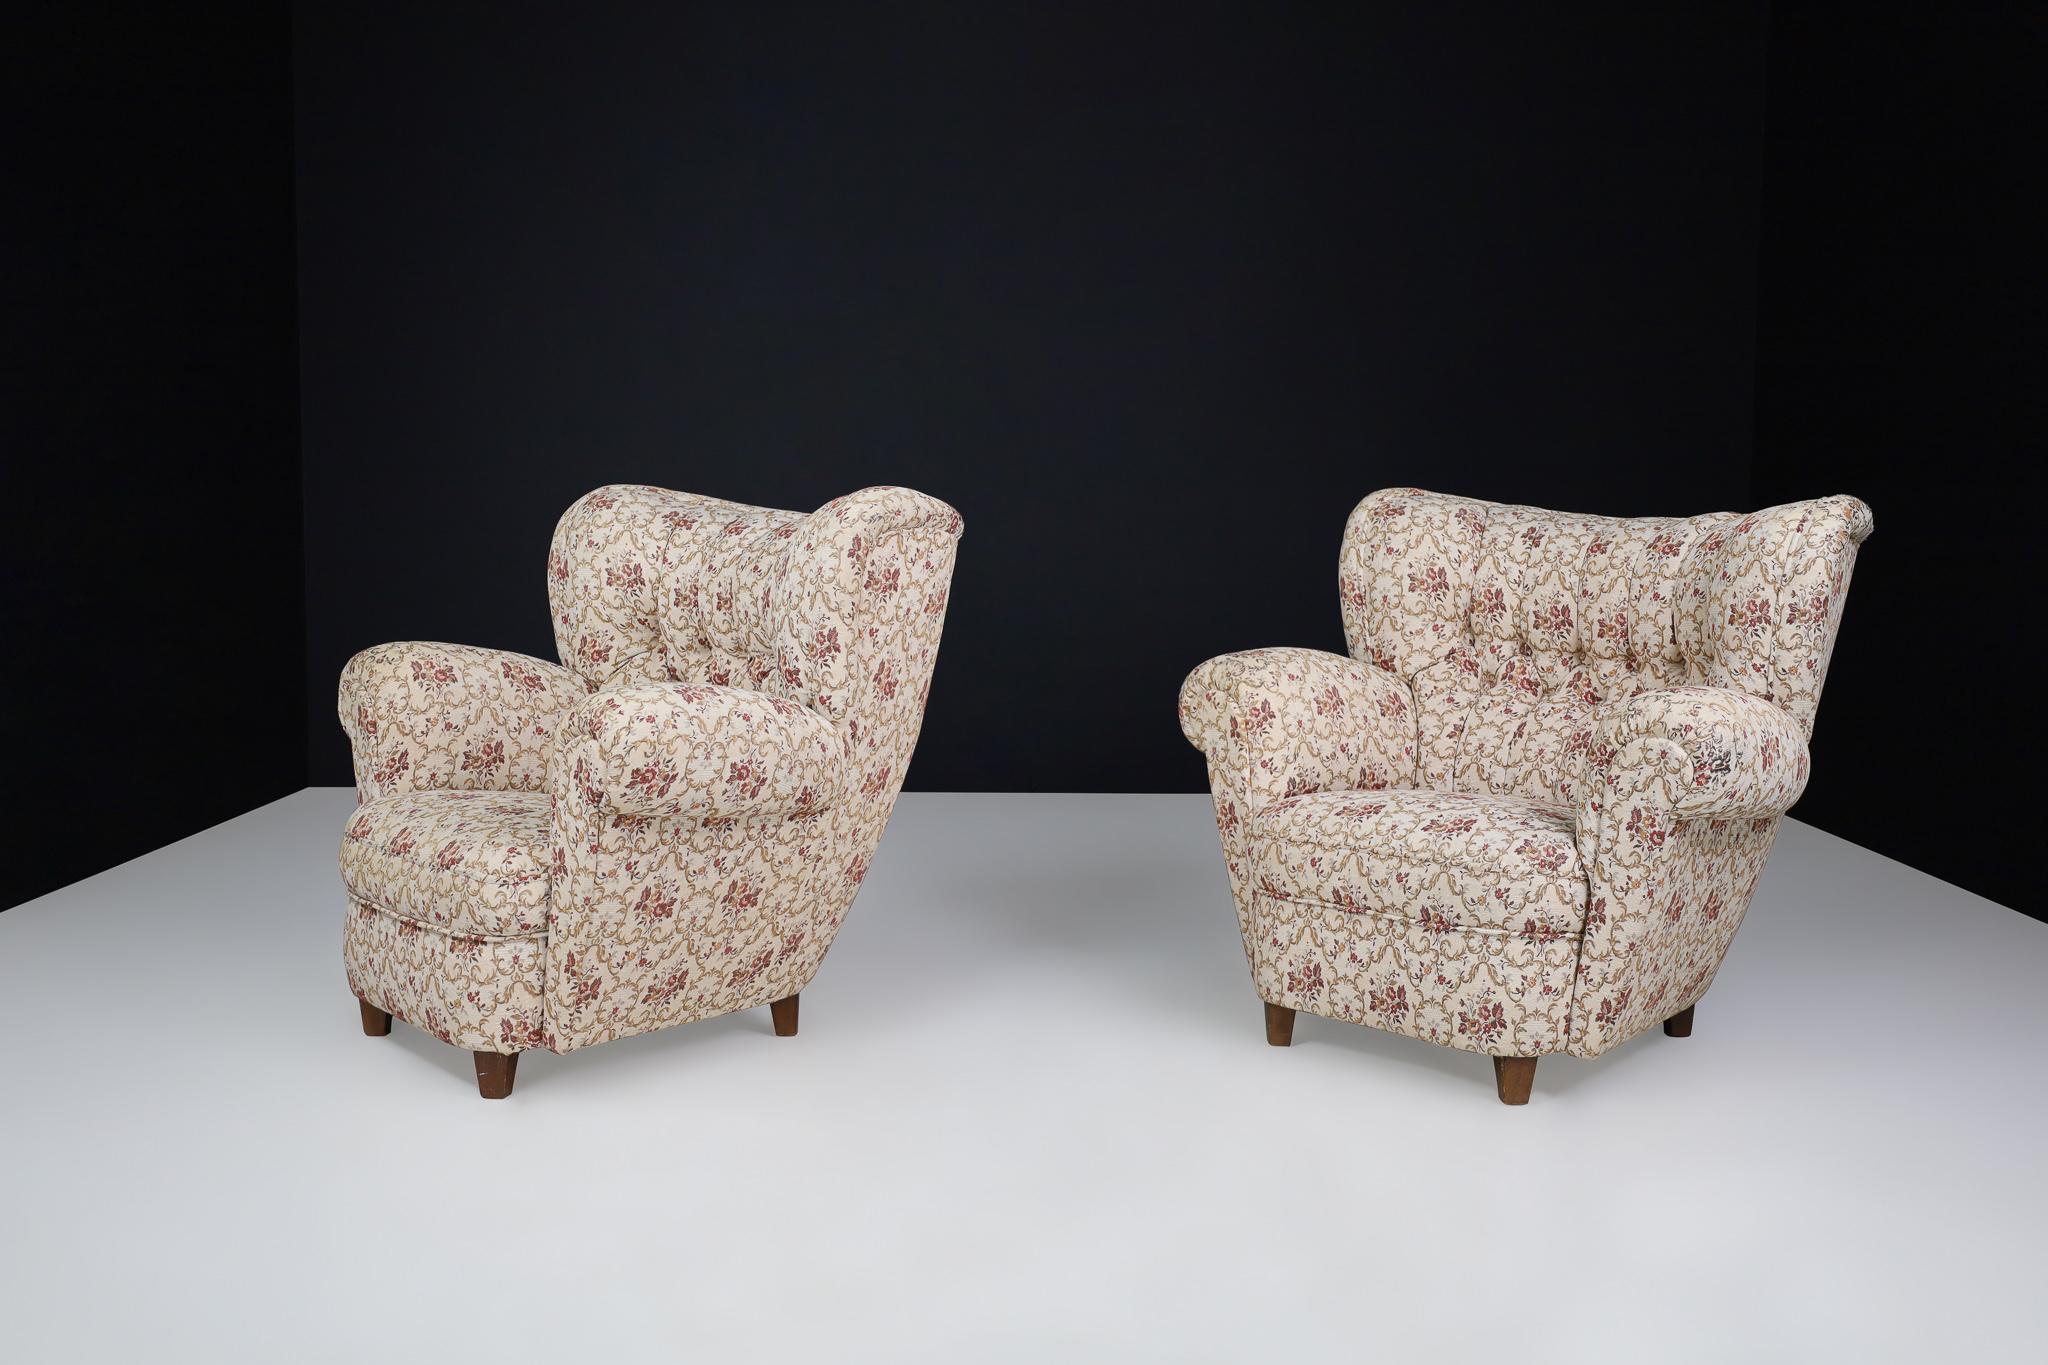 20th Century Large Art-Deco Pair Armchairs in Original Floral Upholstery, Praque 1930s For Sale